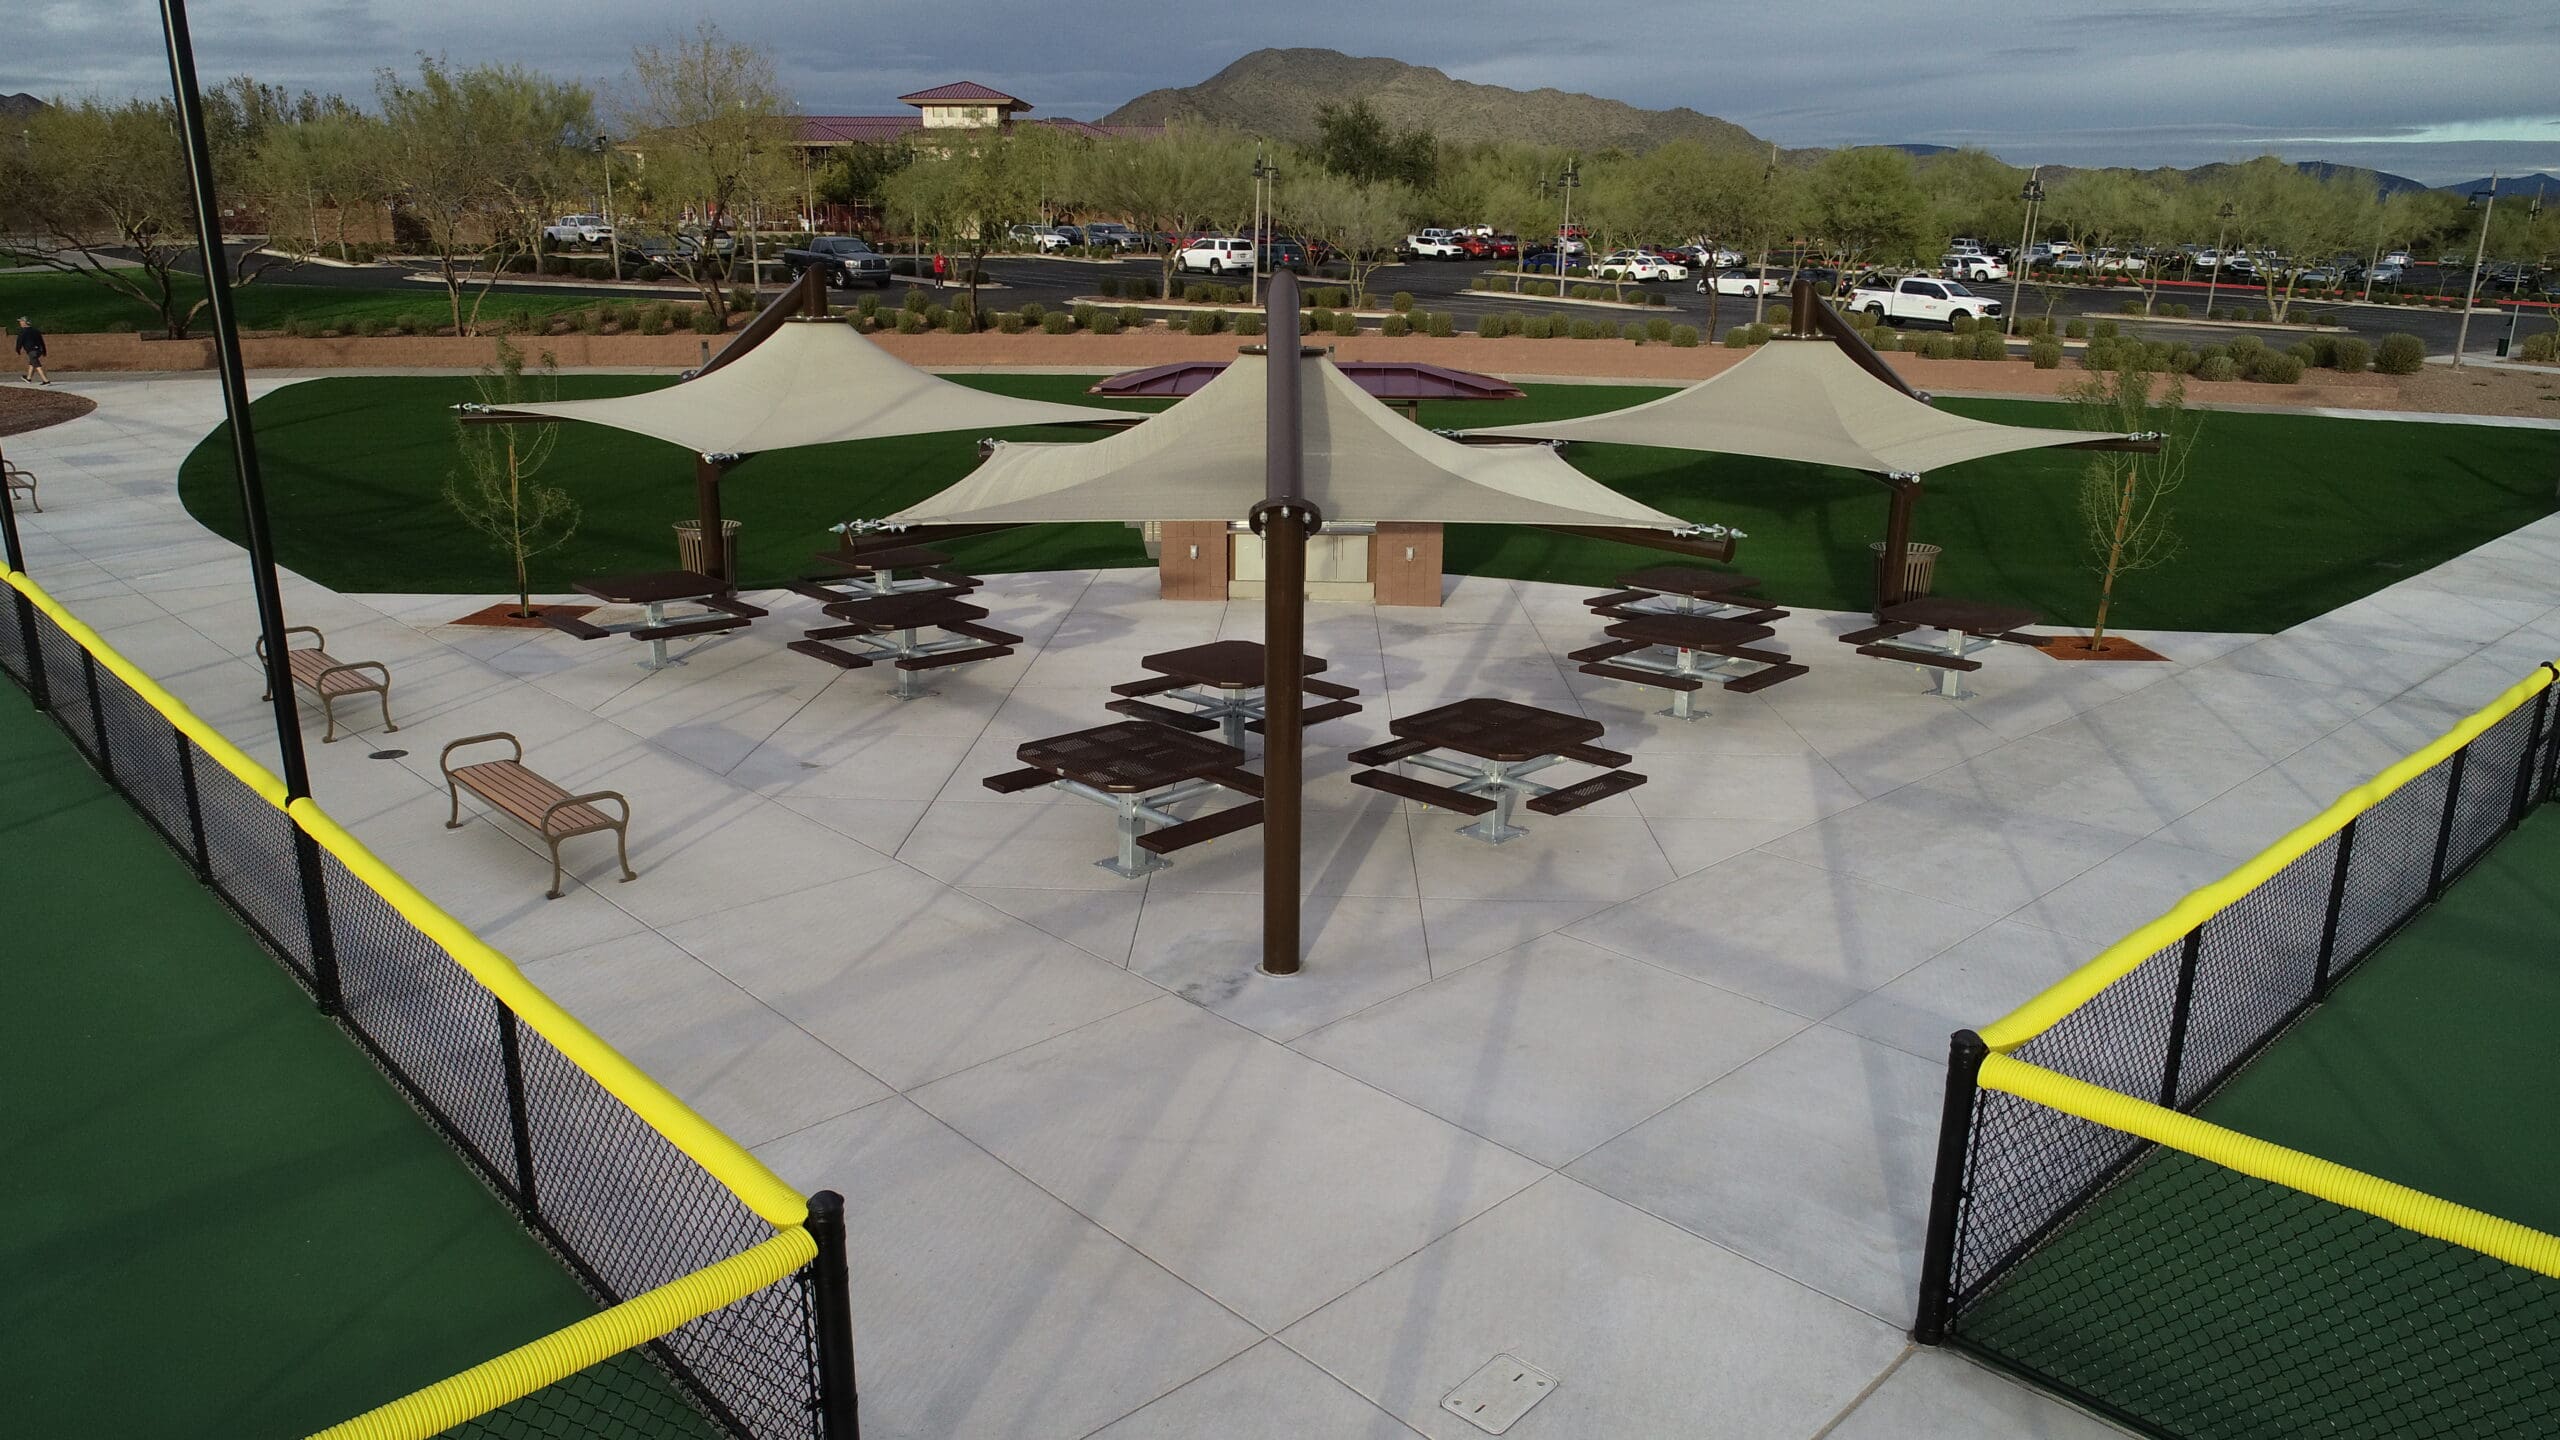 shade structures at rest area at pickleball courts